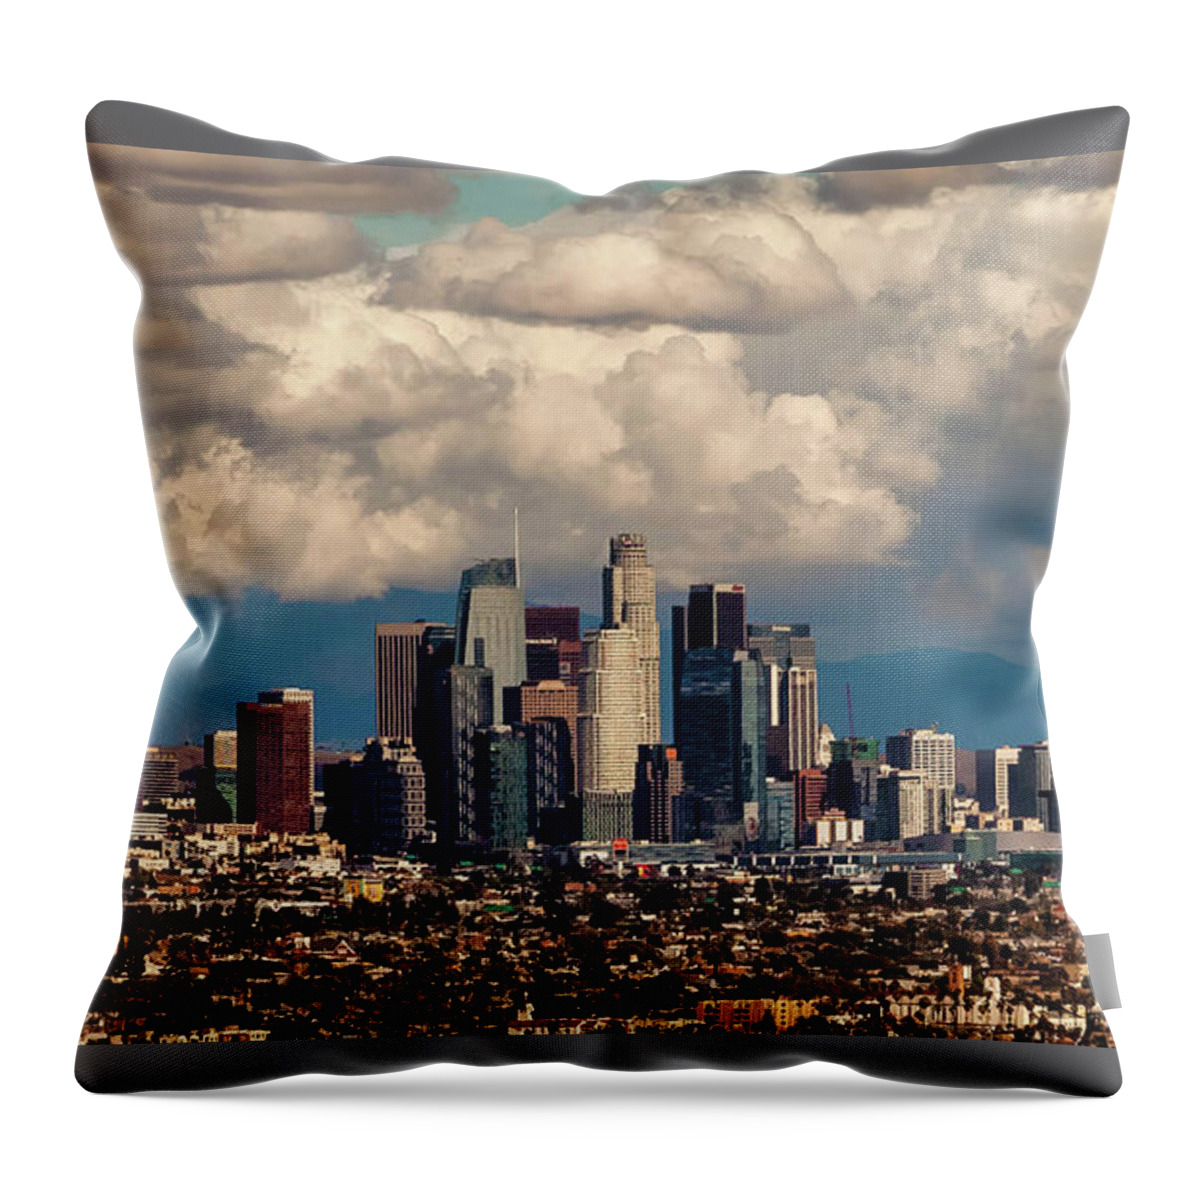 Los Angeles Skyline Throw Pillow featuring the photograph City in The Clouds by April Reppucci